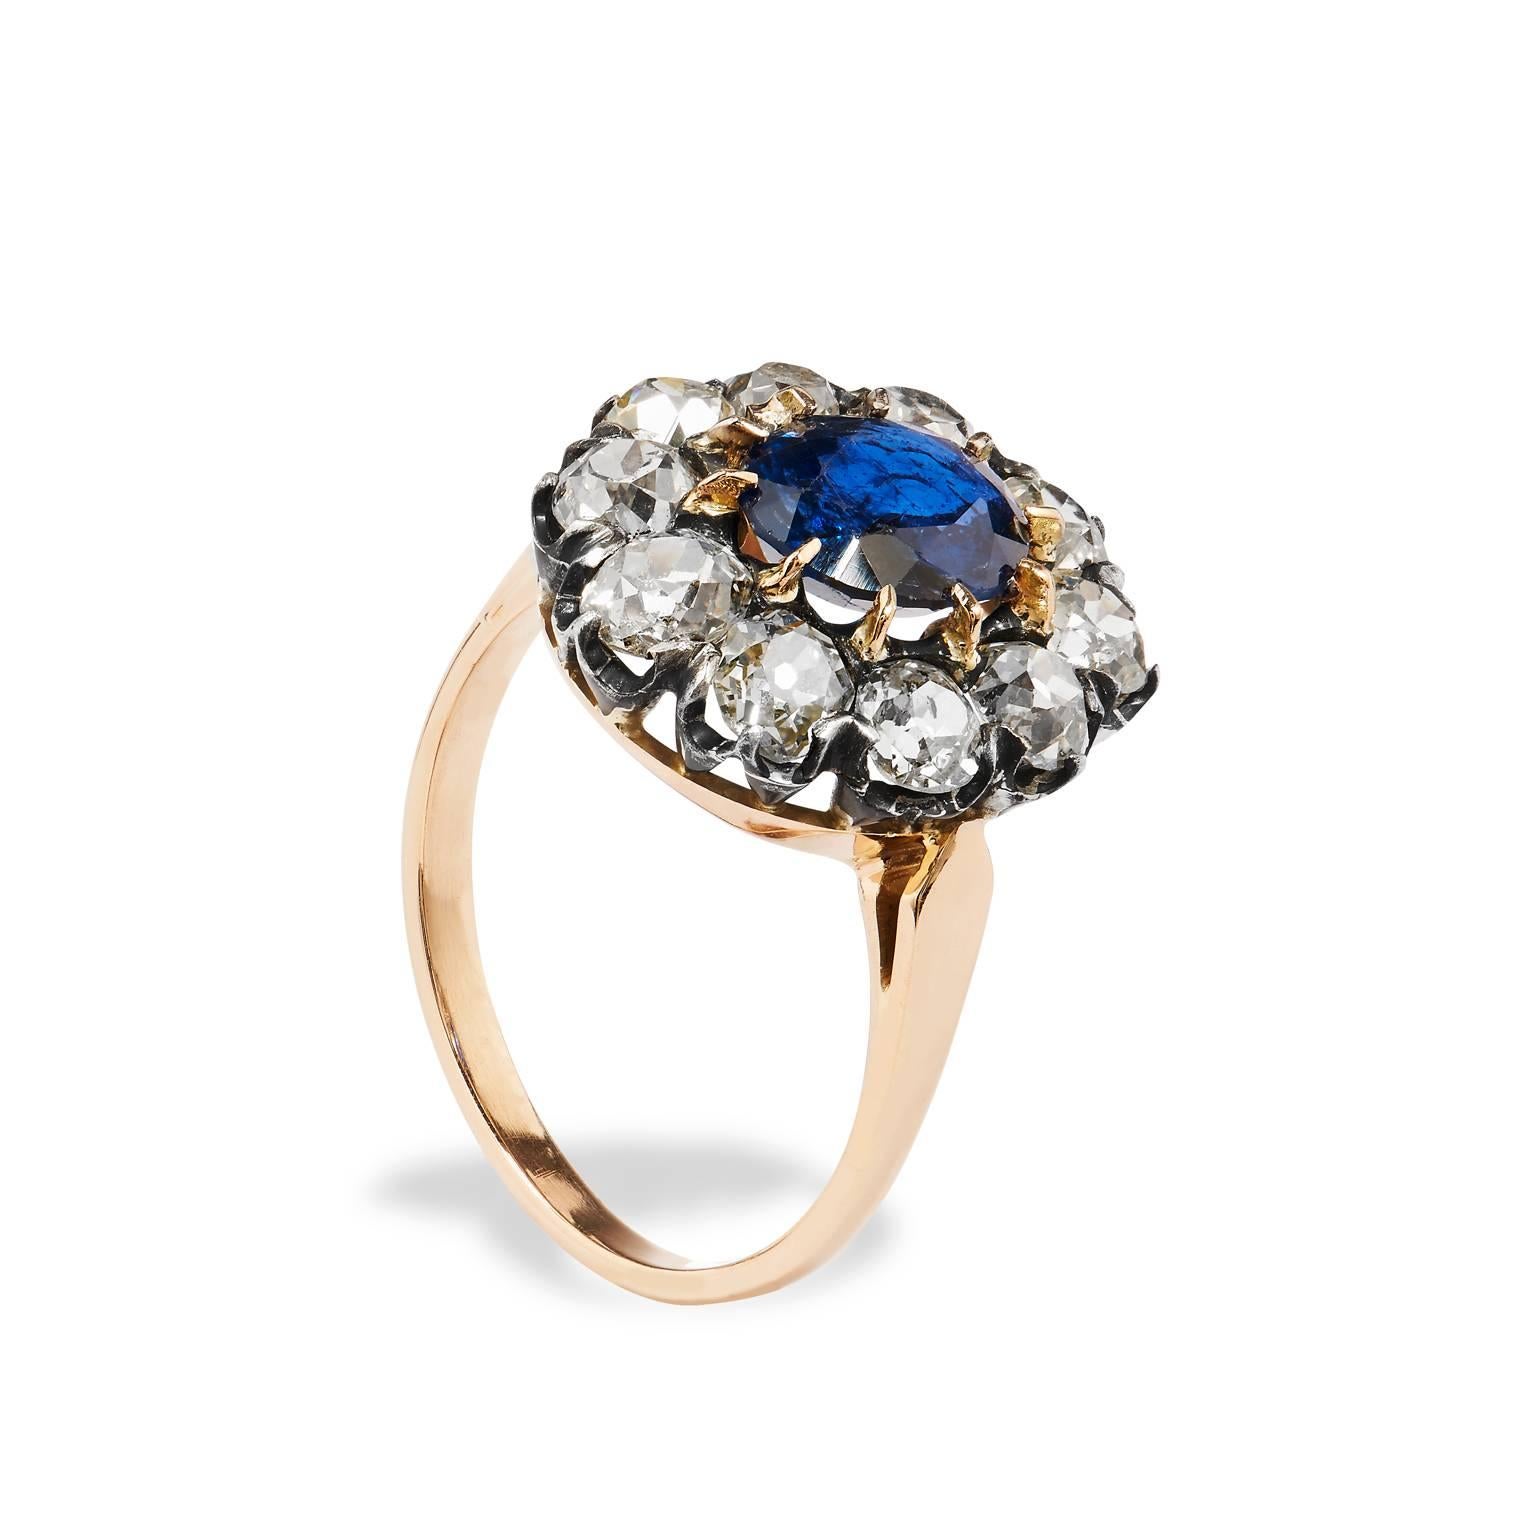 GIA Certified Victorian Inspired Burma No Heat Sapphire and Diamond Ring

Crafted in 18 karat rose gold and silver, this Victorian inspired ring showcases a stunning 1.91 carat no heat, GIA certified Burma Sapphire adorned by 2.59 carats of Old Mine